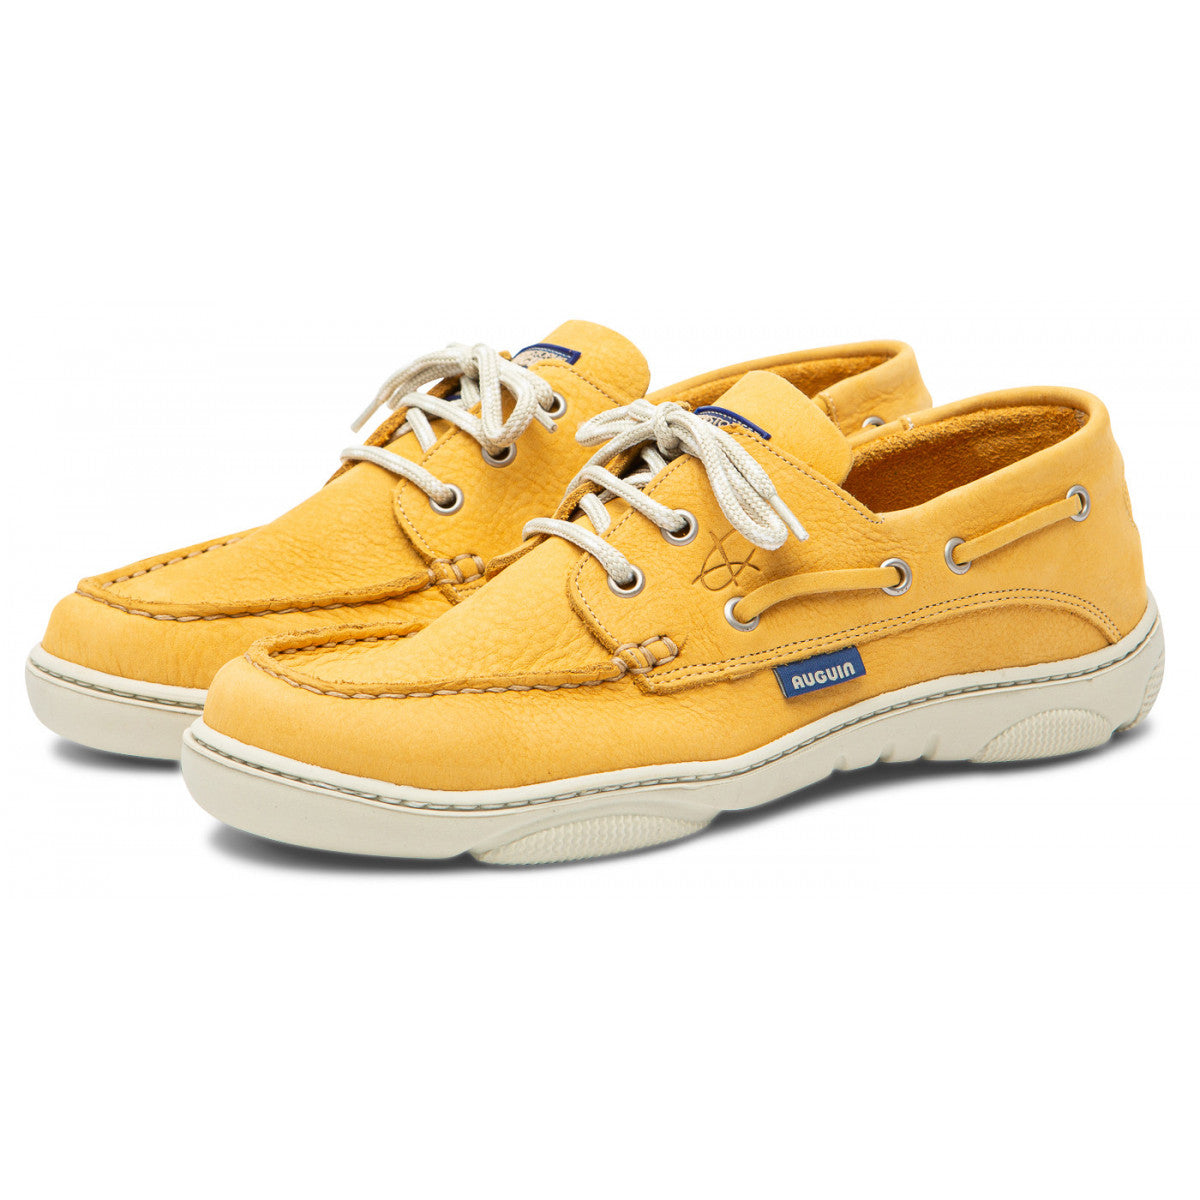 Christophe Auguin French Boat Shoe in Jaune Yellow